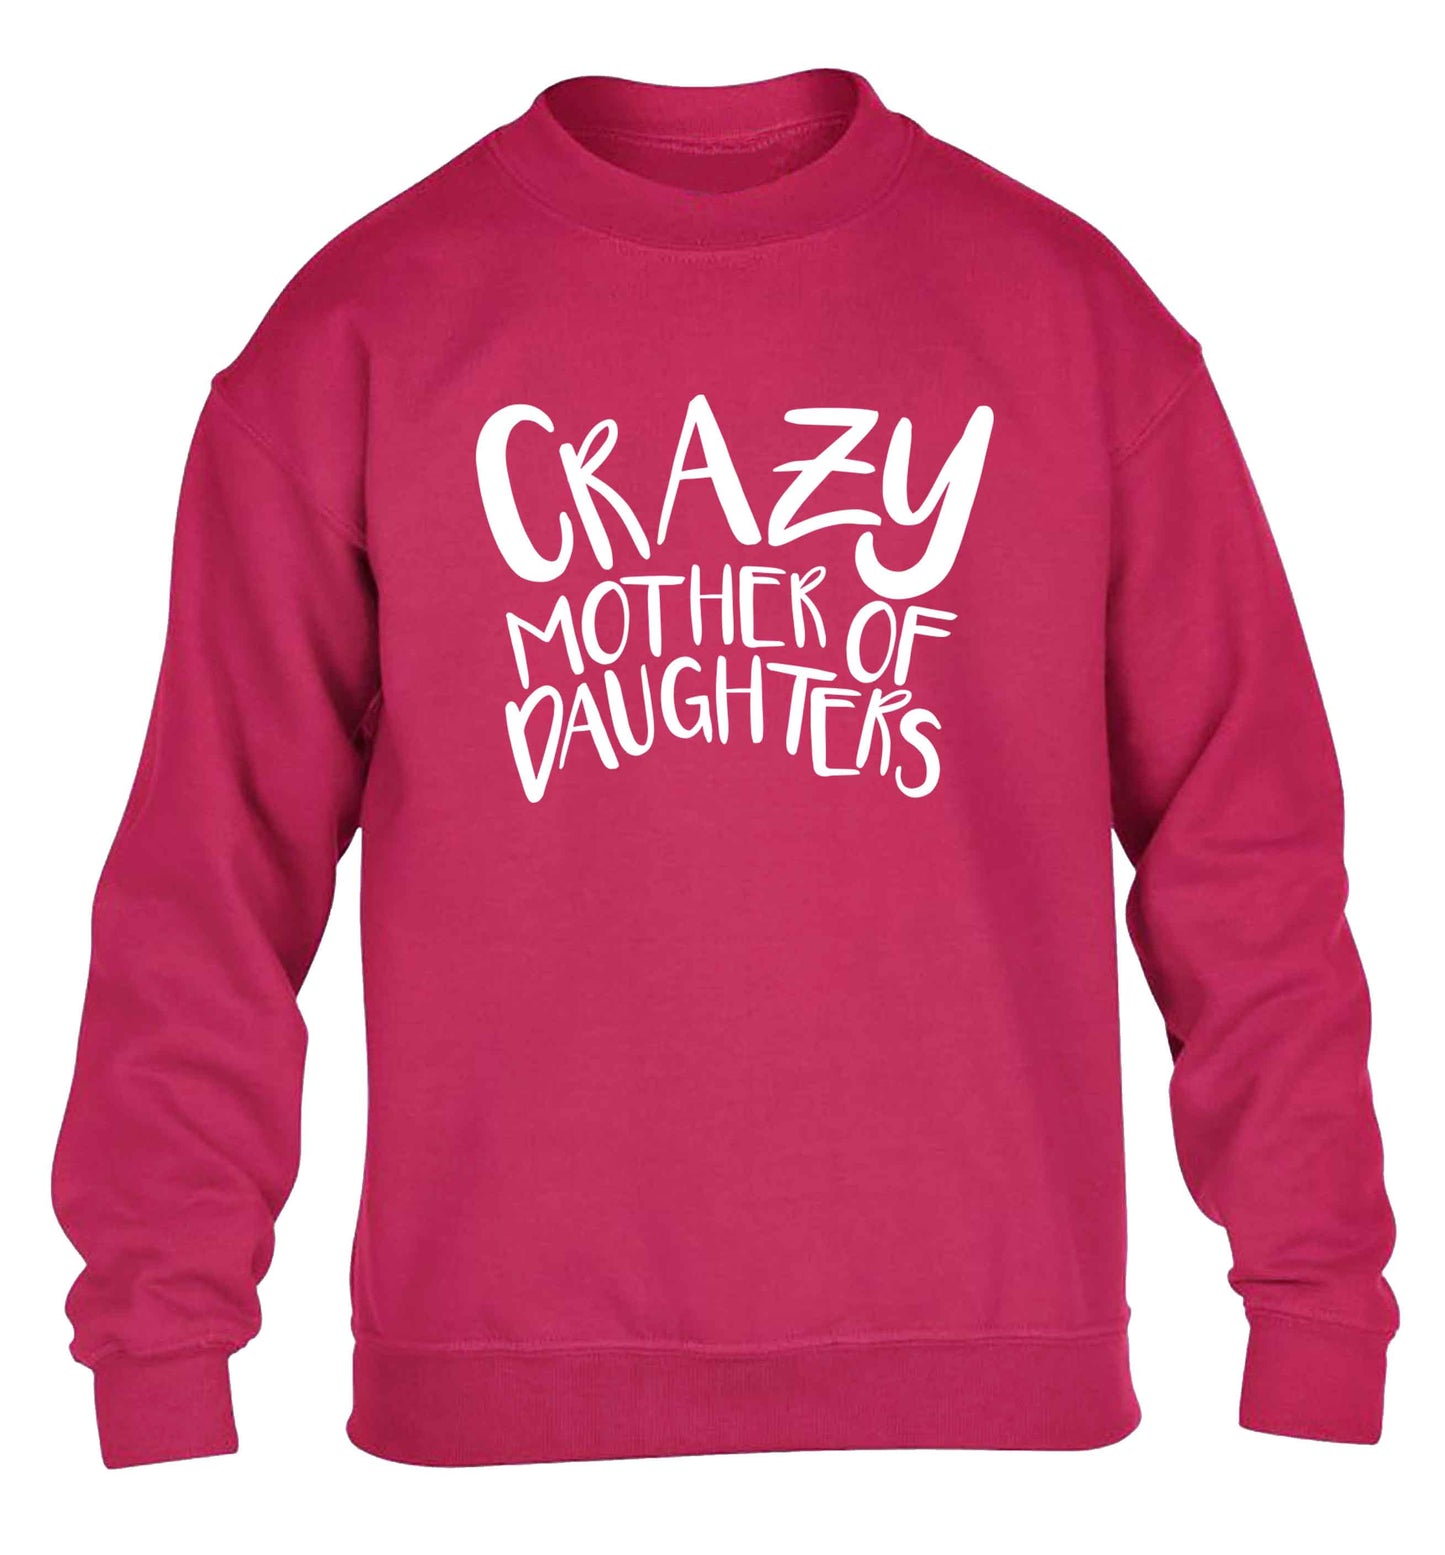 Crazy mother of daughters children's pink sweater 12-13 Years